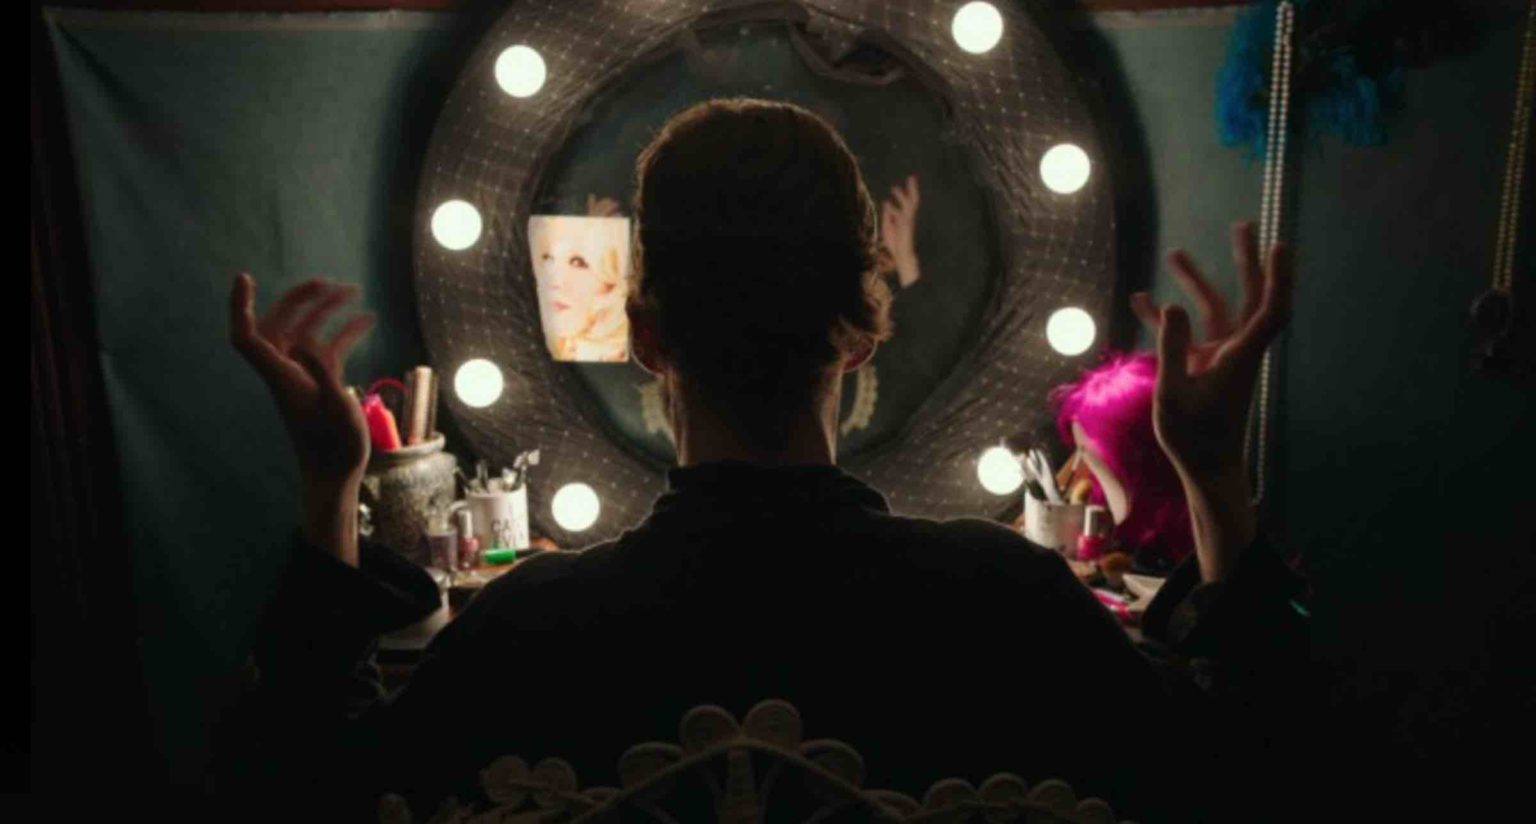 'Freak Show' has found a nice cult following. Here’s why 'Freak Show' is the best gay coming-of-age movie out there.